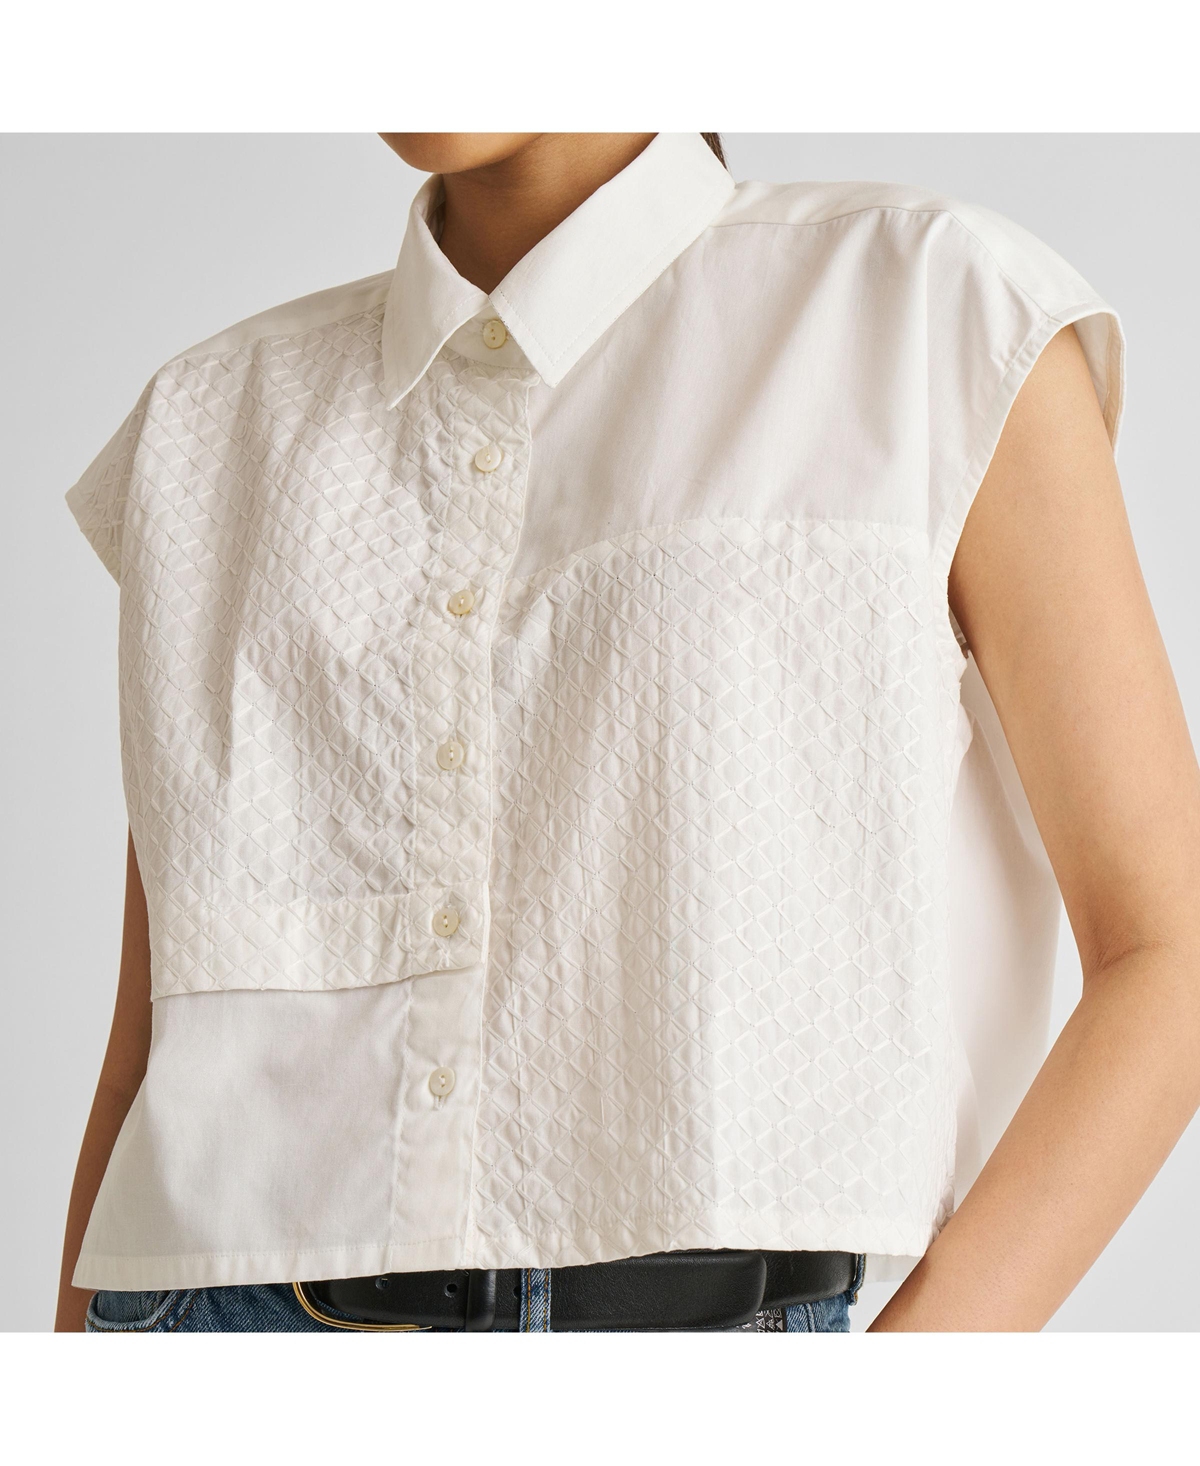 Women's Embroidered Panel Crop Top - Coconut white